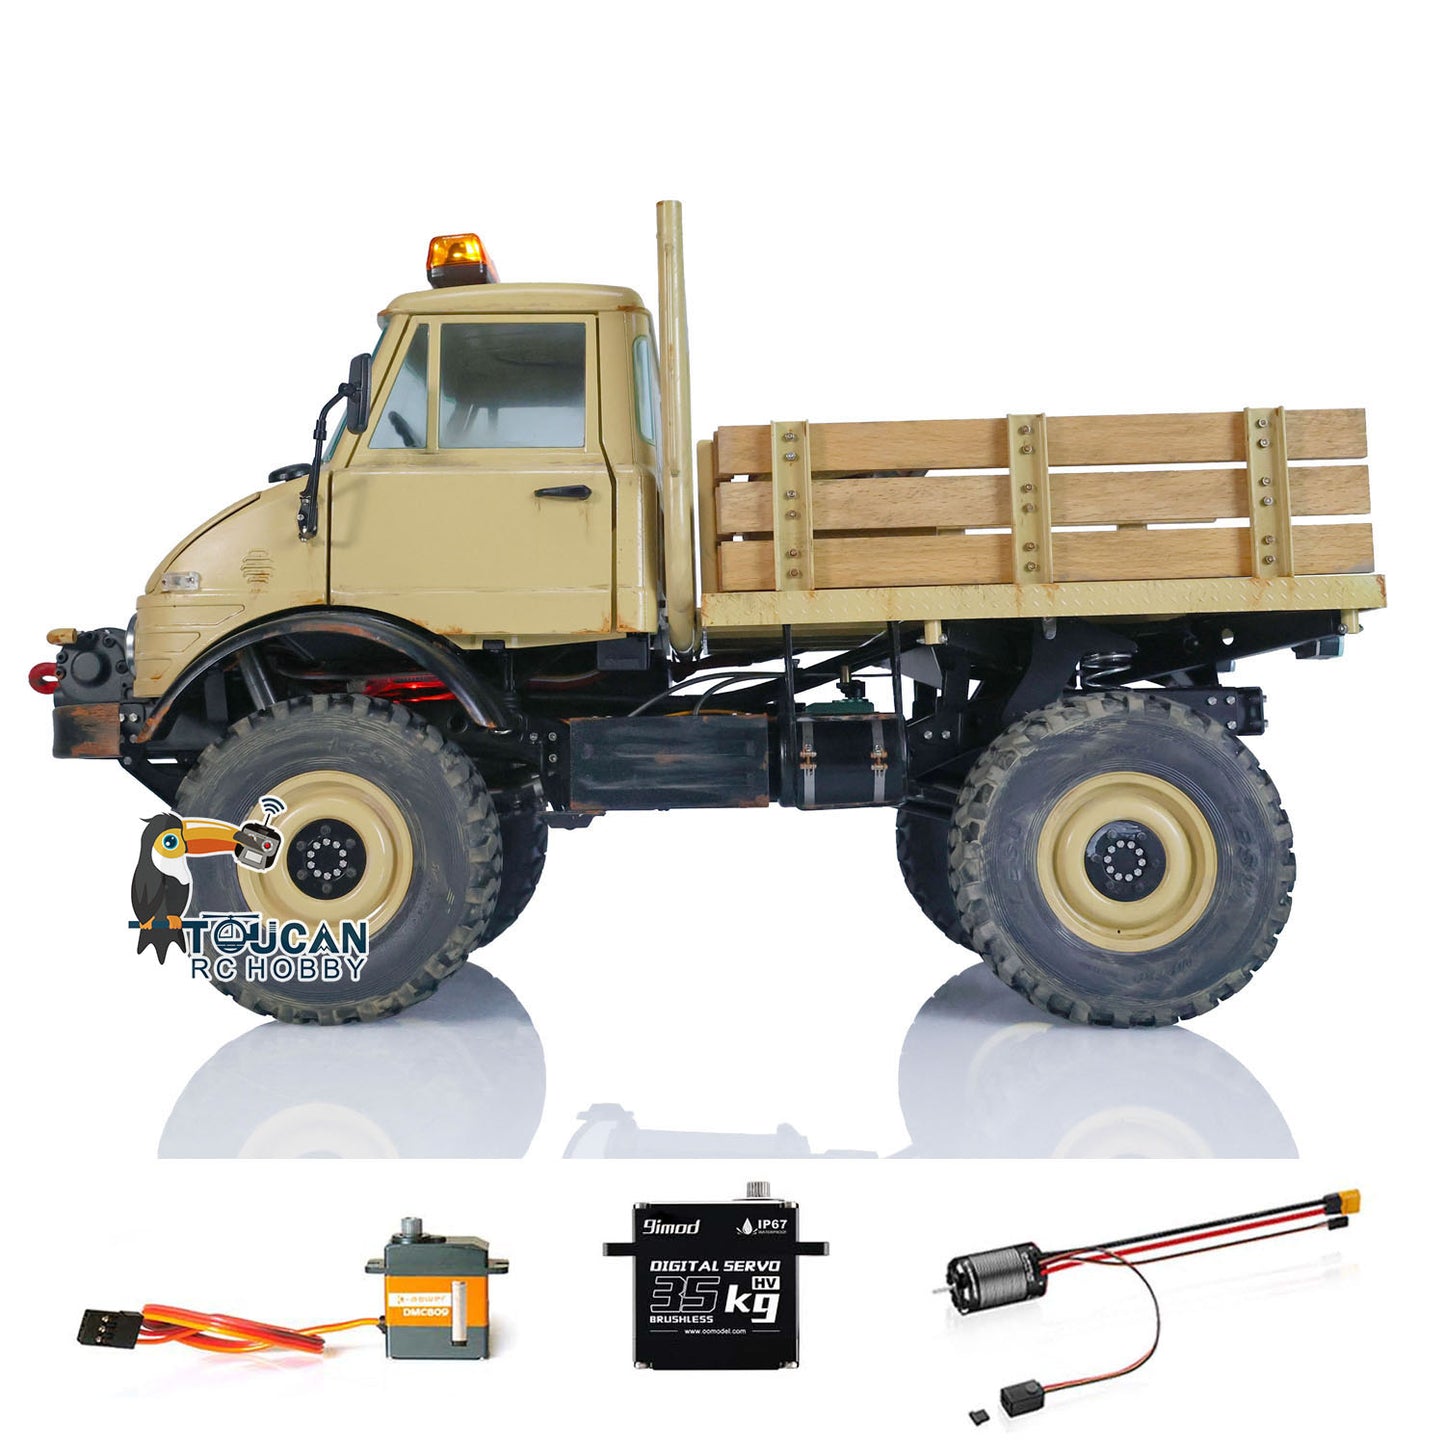 LESU 4x4 1/10 RAVE-UM406 Upgraded Brushless Motor ESC Sound Light Winch Remote Control Climbing Truck RC Off-Road Vehicle Model